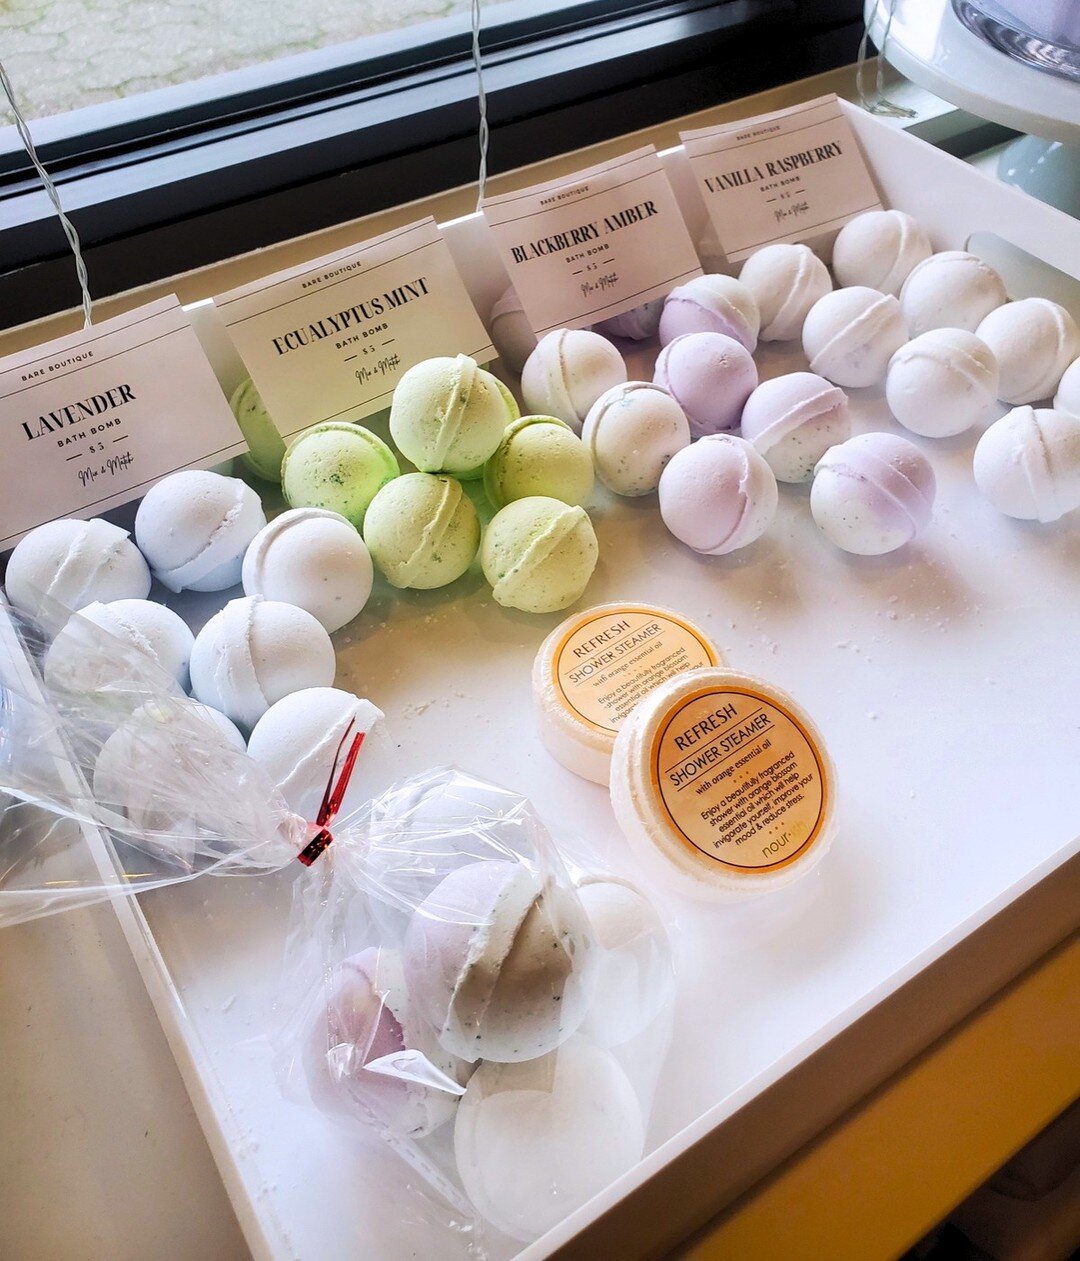 Need a gift idea for Valentine's that's the bomb? 💣❤️

We have your favorite Nourish Bath Bombs and Shower Steamers still in stock as part of our 5/$25 deal! 🛁
(And yes, that includes bath accessories, eye gels, lip gels, and sheet masks, too!) 

G